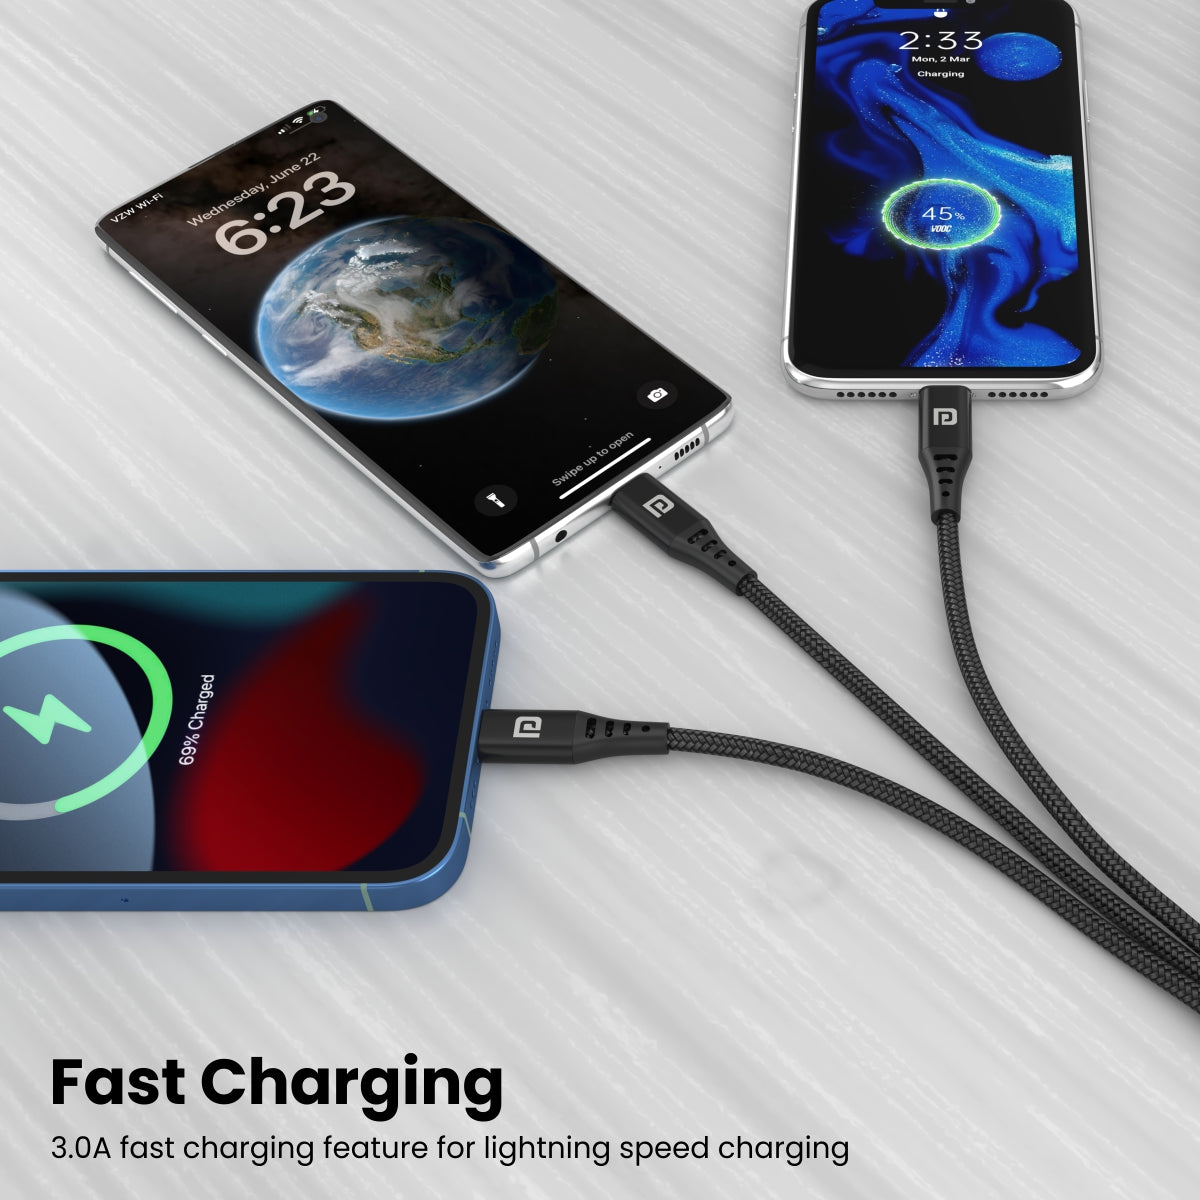 Black Portronics Konnect J9 3-in-1 USB cable has Type-C, Micro USB and 8-pin fast charging cables 